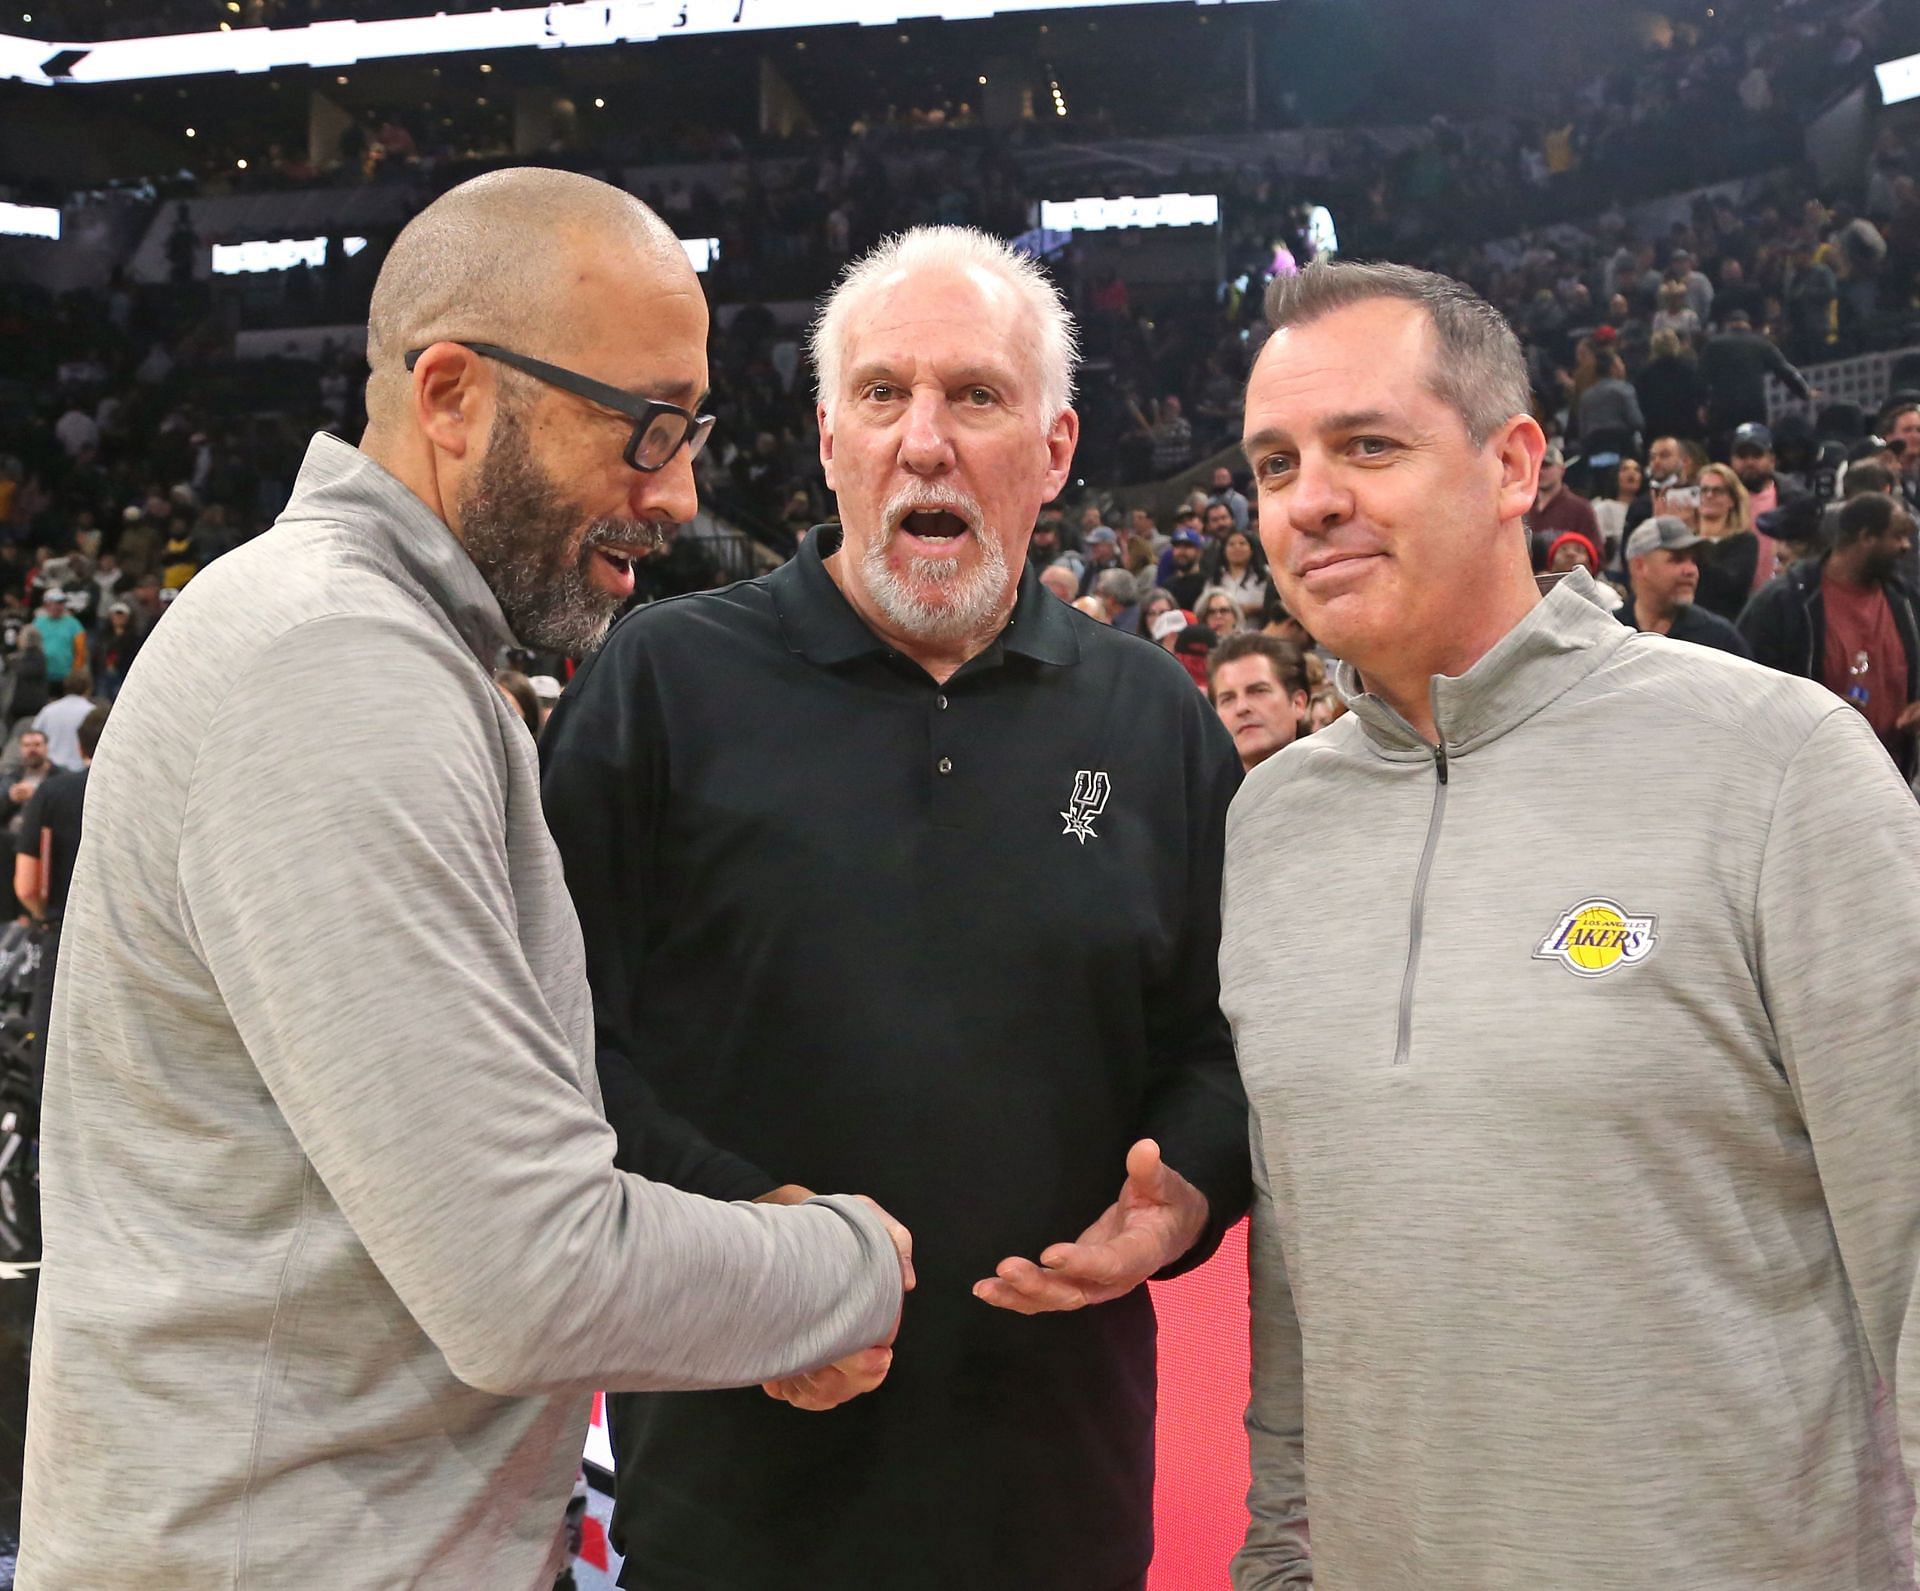 Gregg Popovich being greeted by David Fizdale and Frank Vogel after his 1335th win